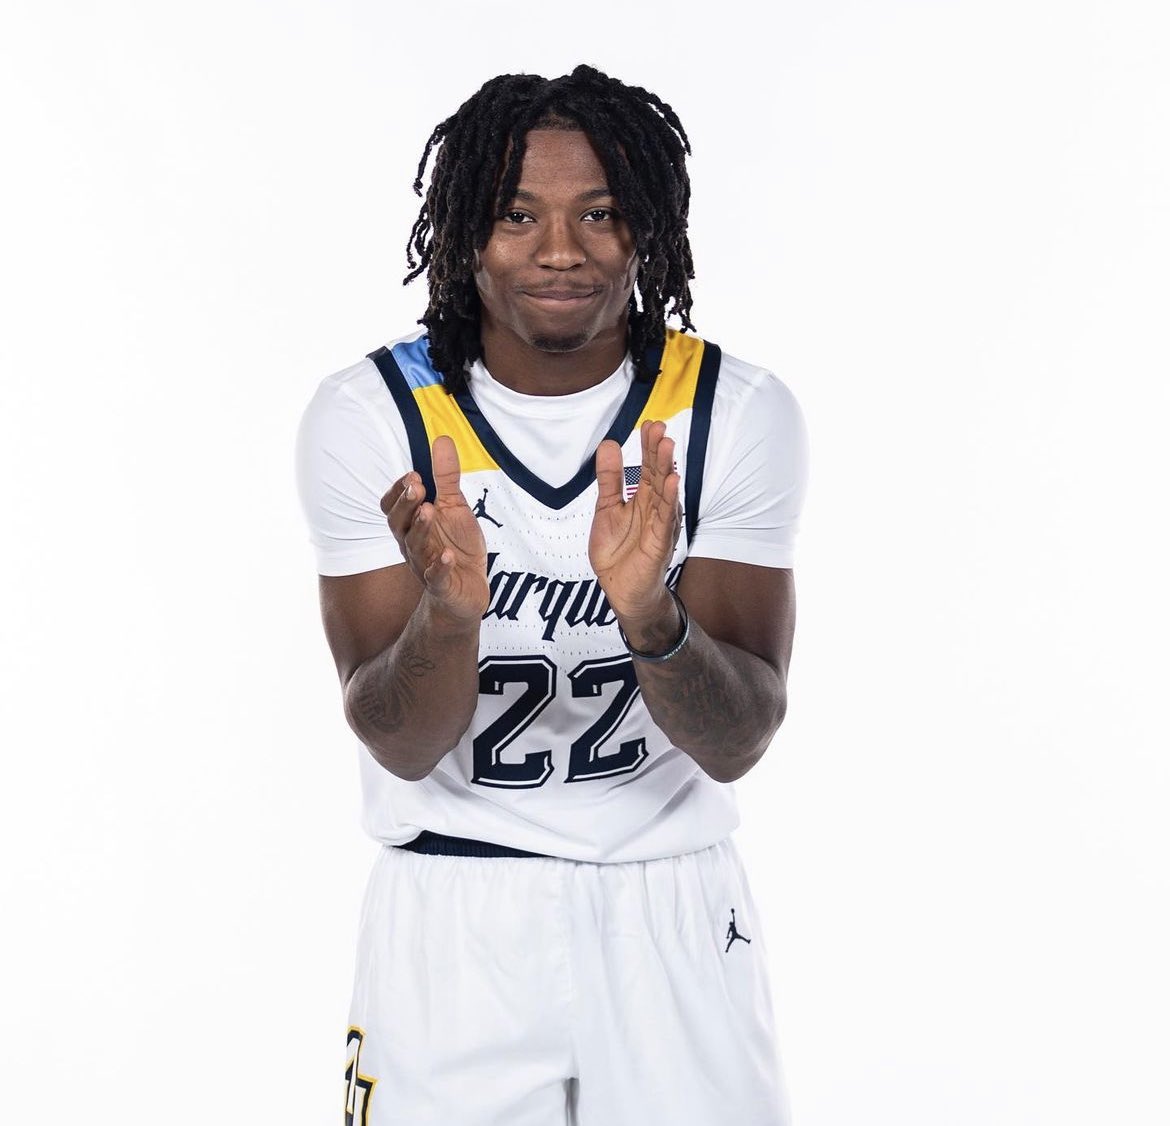 Season two, episode 5️⃣ Marquette freshman and Gahanna legend @Sean_jones5 joins us to talk the upcoming season, his Gahanna career, how to play as a smaller guard and MUCH MORE 🔥 Apple - podcasts.apple.com/us/podcast/sea… Spotify - open.spotify.com/episode/6rUUgO…